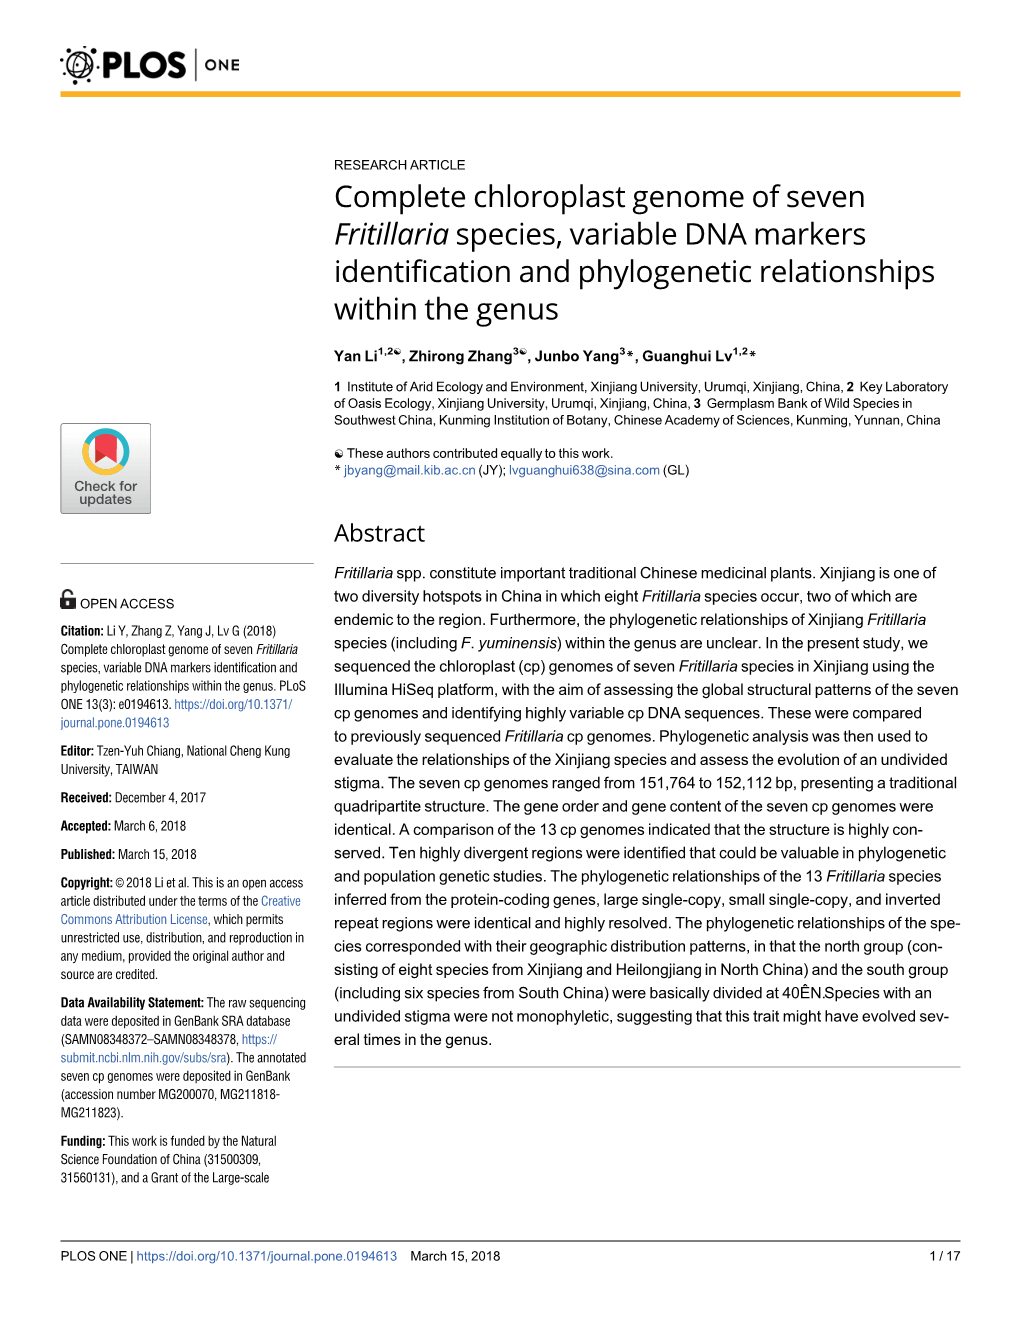 Complete Chloroplast Genome of Seven Fritillaria Species, Variable DNA Markers Identification and Phylogenetic Relationships Within the Genus